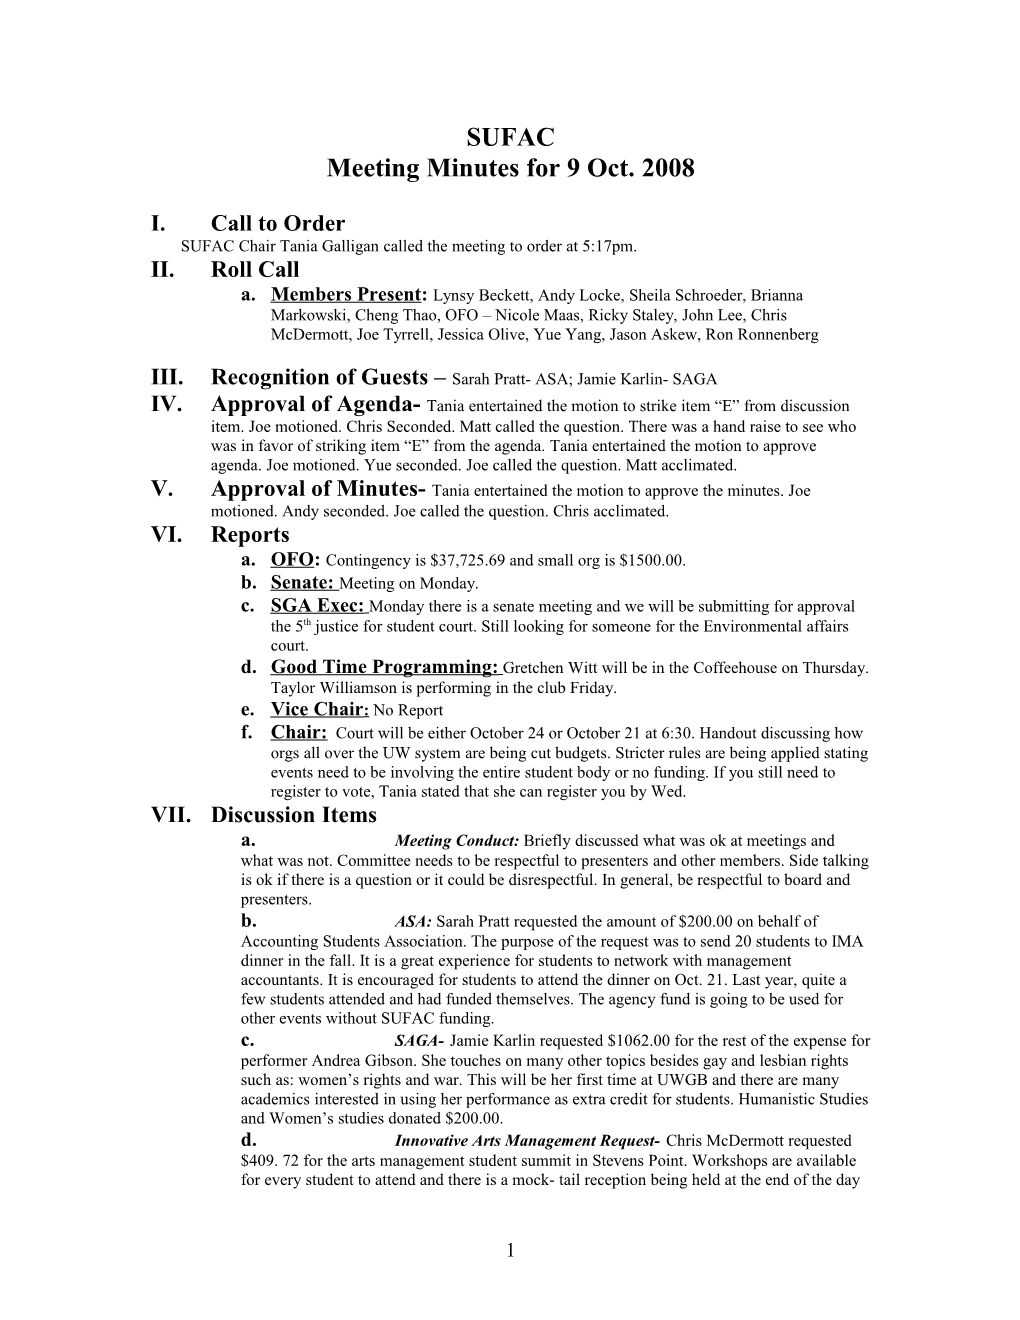 Meeting Minutes for 9 Oct. 2008